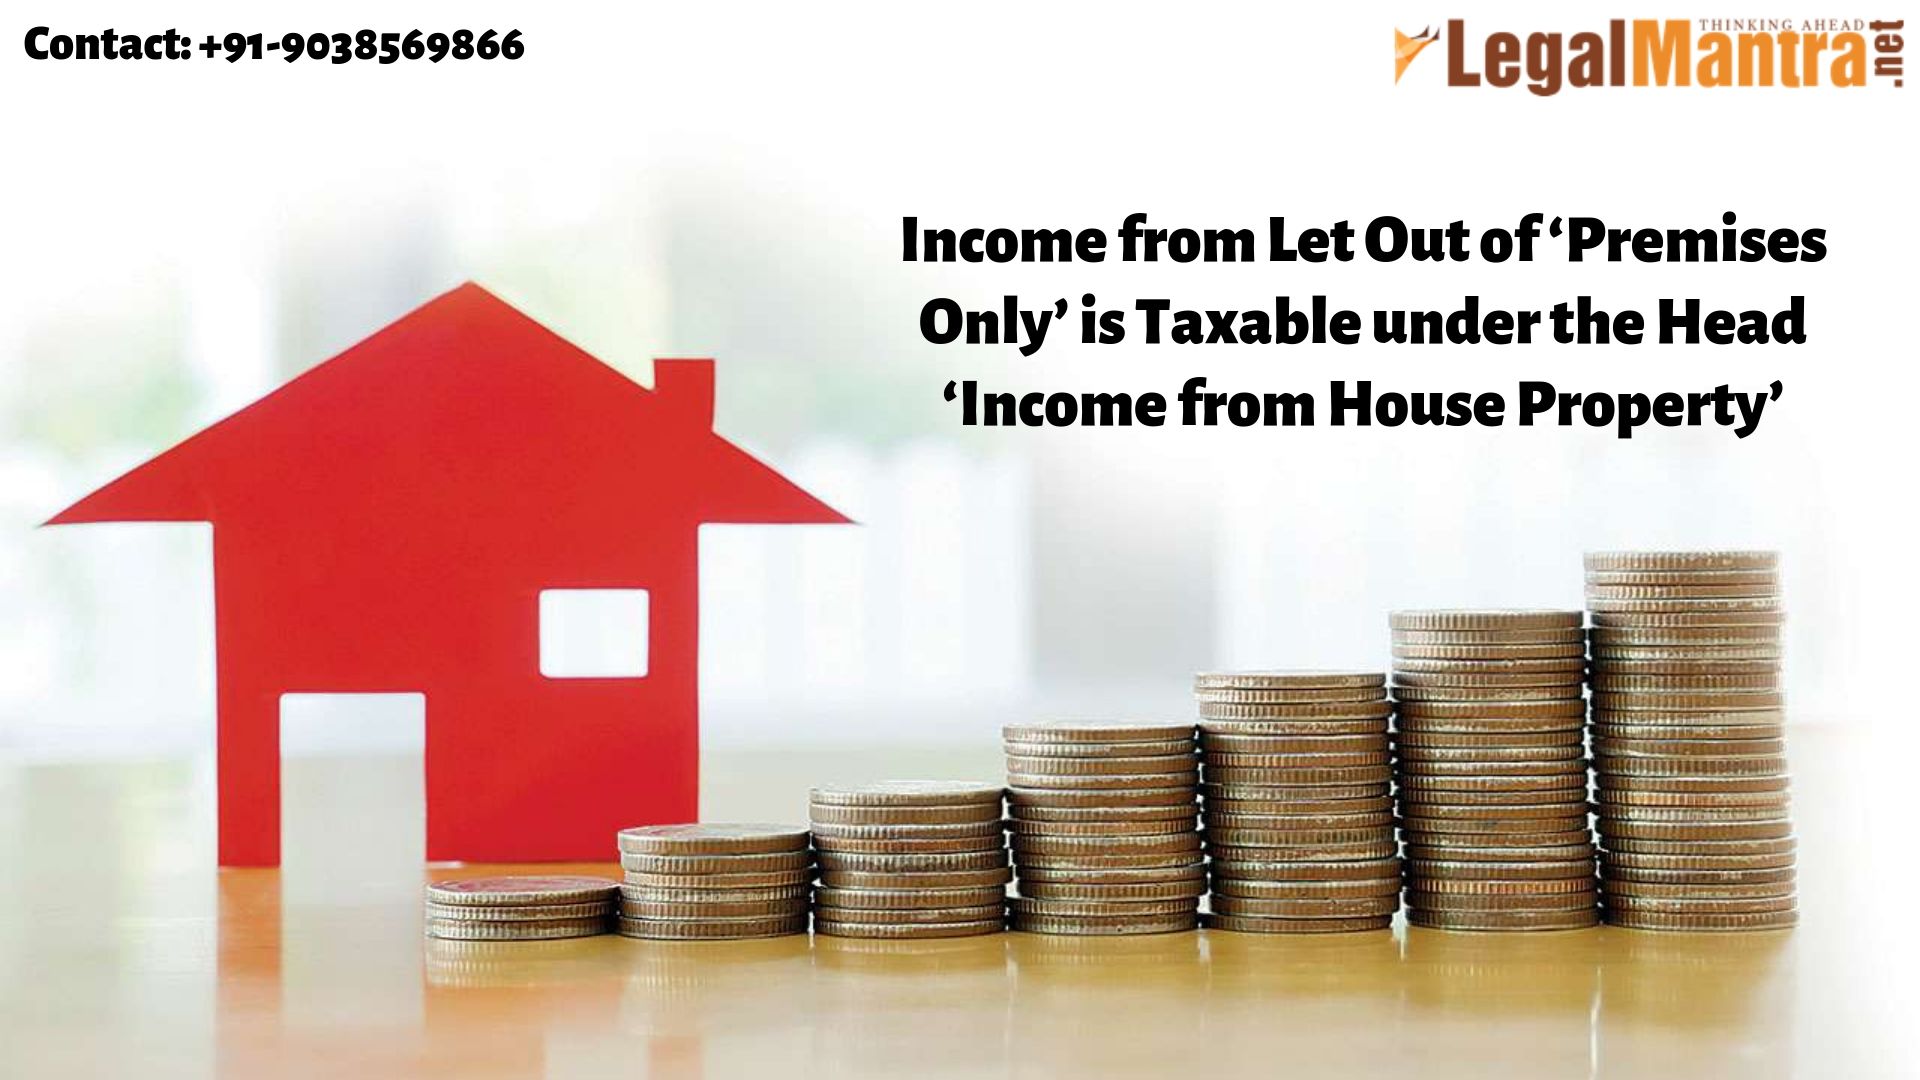 Income from Let Out of ‘Premises Only’ is Taxable under the Head ‘Income from House Property’